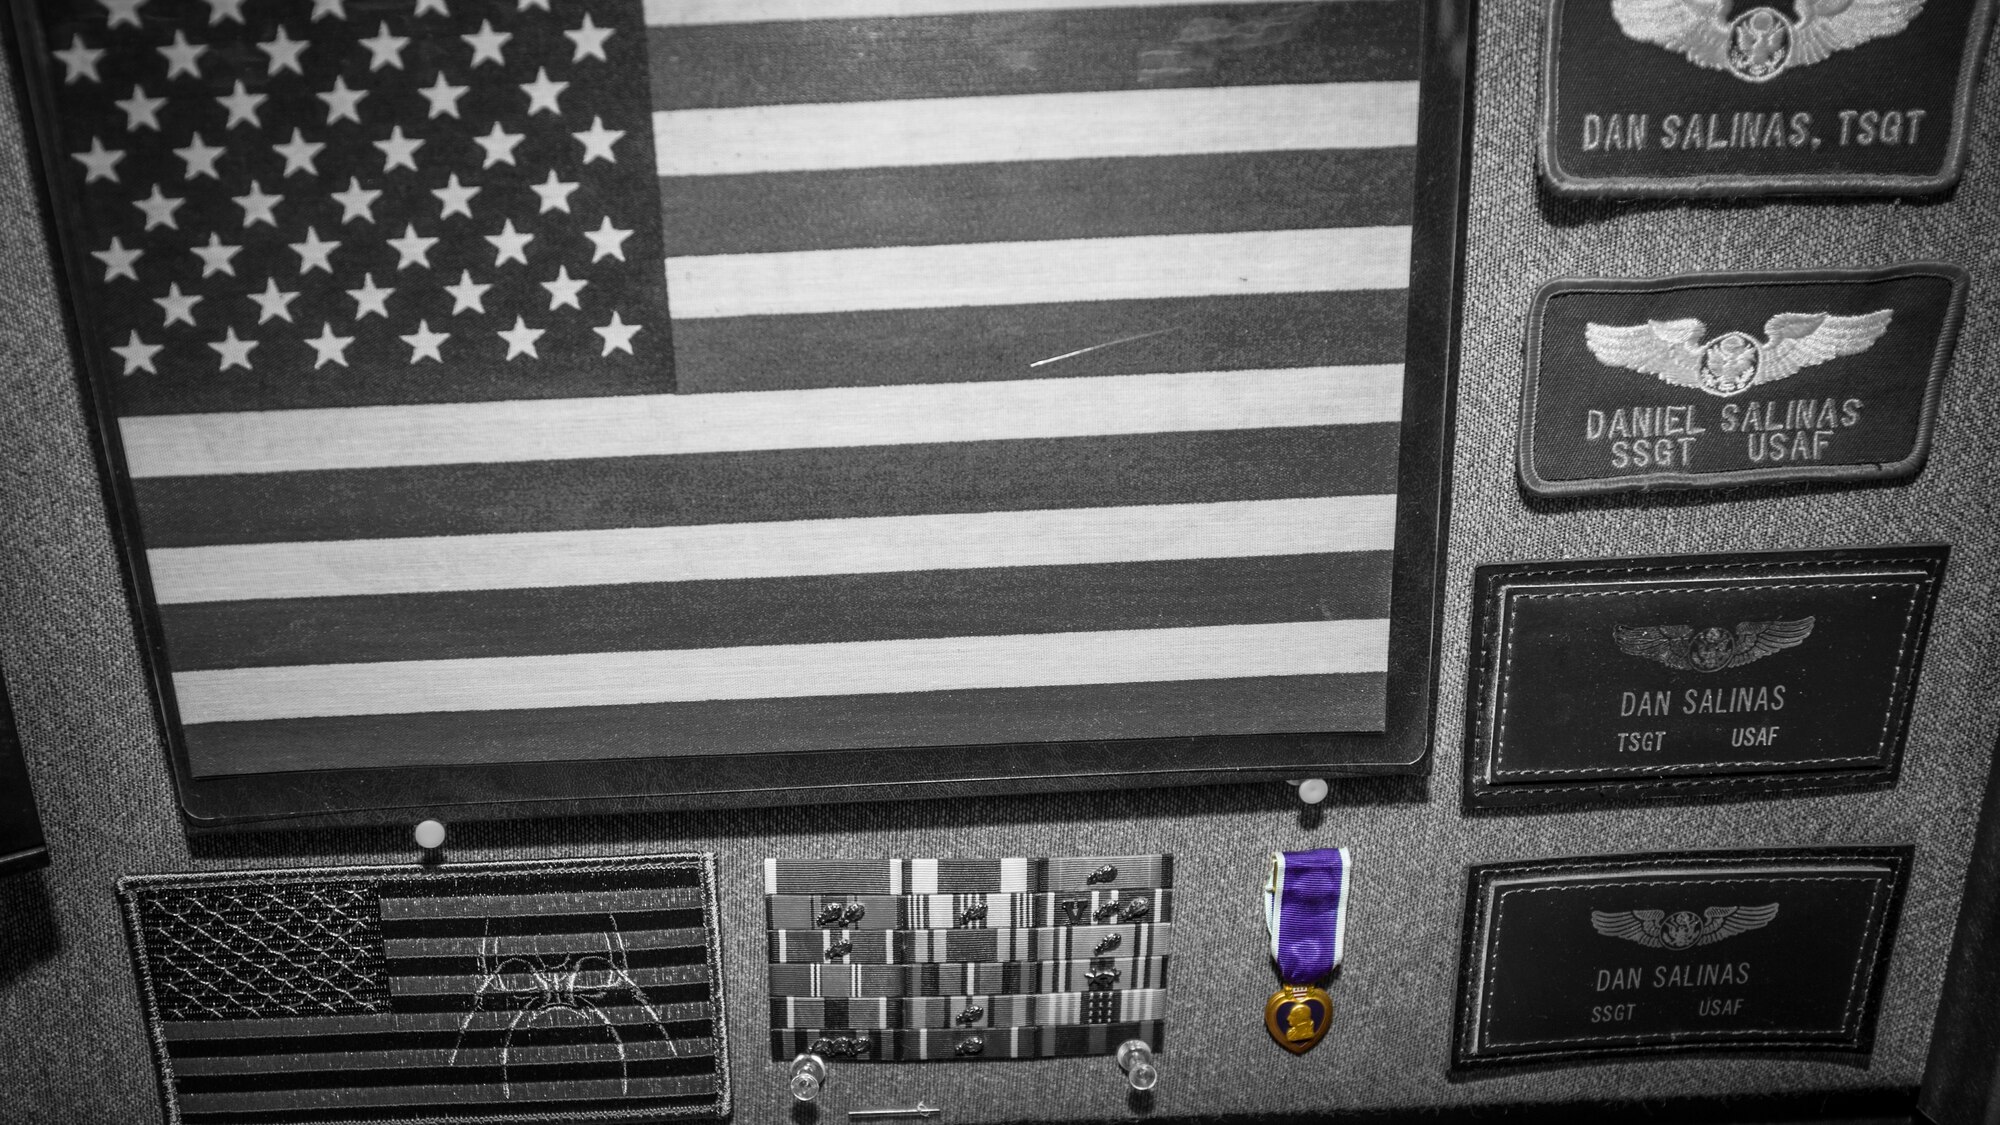 A purple heart is displayed on the desk of Daniel Salinas, a Khobar Towers bombing survivor, on Sept. 9 at Holloman Air Force Base, N.M.  The Khobar Towers, located near Dhahran, Saudi Arabia, were bombed June 25, 1996, killing 19 service members and wounding 372 more. Salinas, who was deployed as the staff sergeant of safety, was injured in the blast. Salinas currently works as the 49th Wing Occupational Safety Technician. (U.S. Air Force photo by Airman 1st Class Emily A. Kenney) 